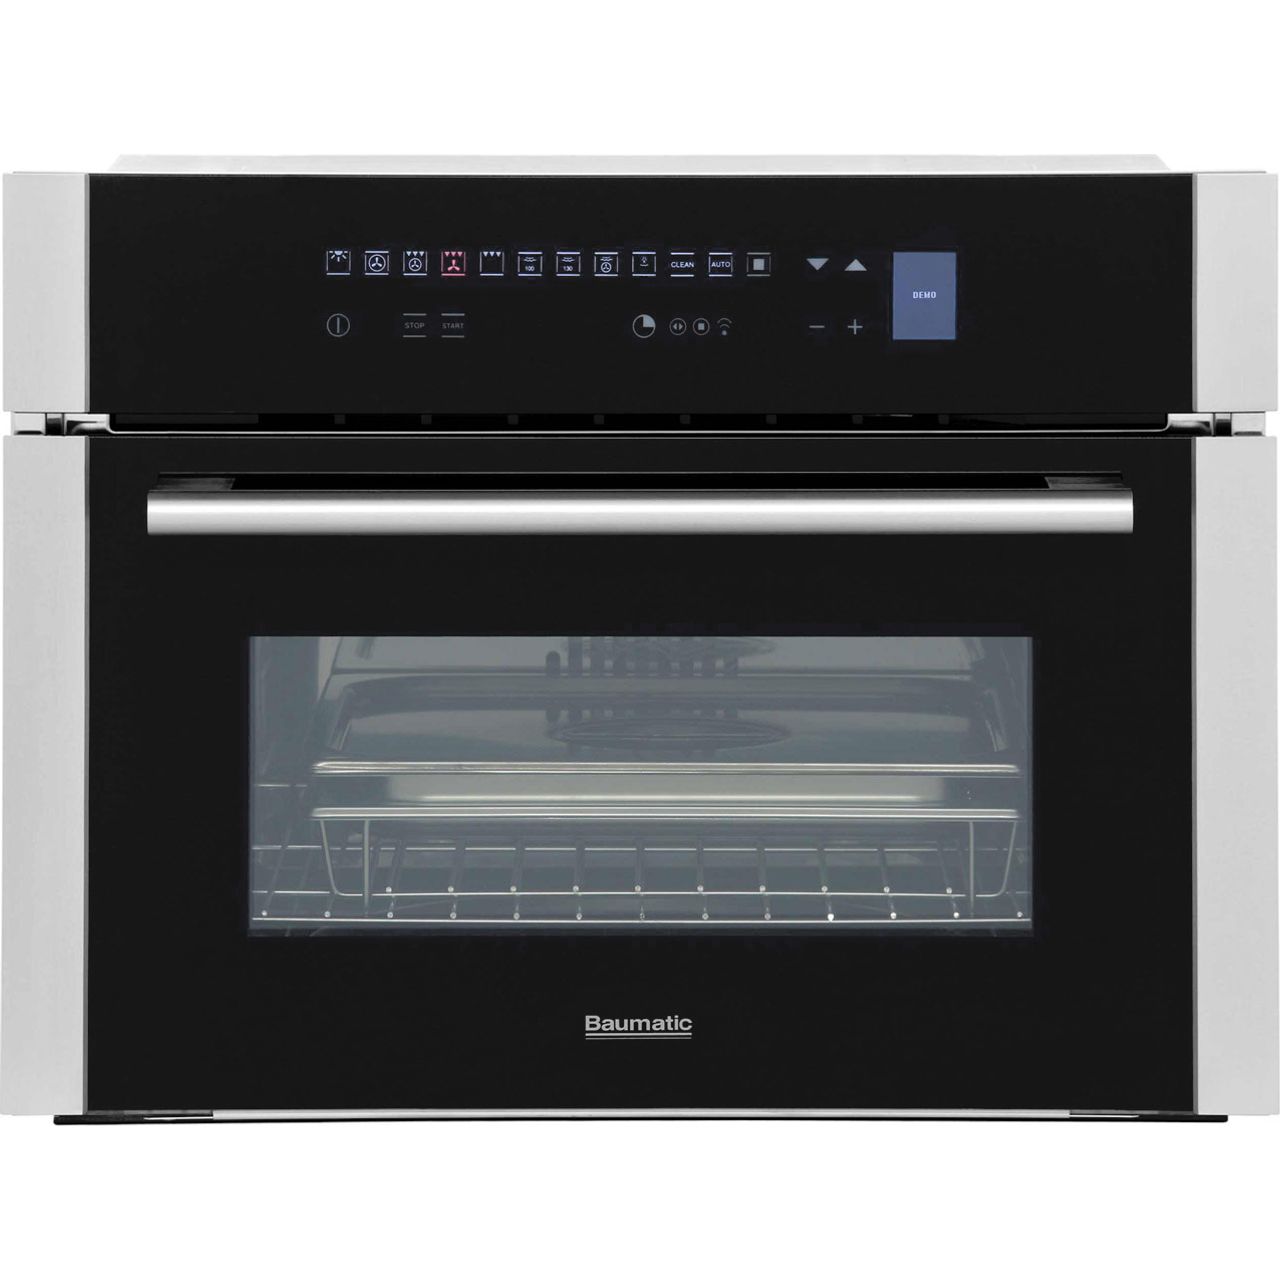 Baumatic BCS461SS Built In Compact Steam Oven Review